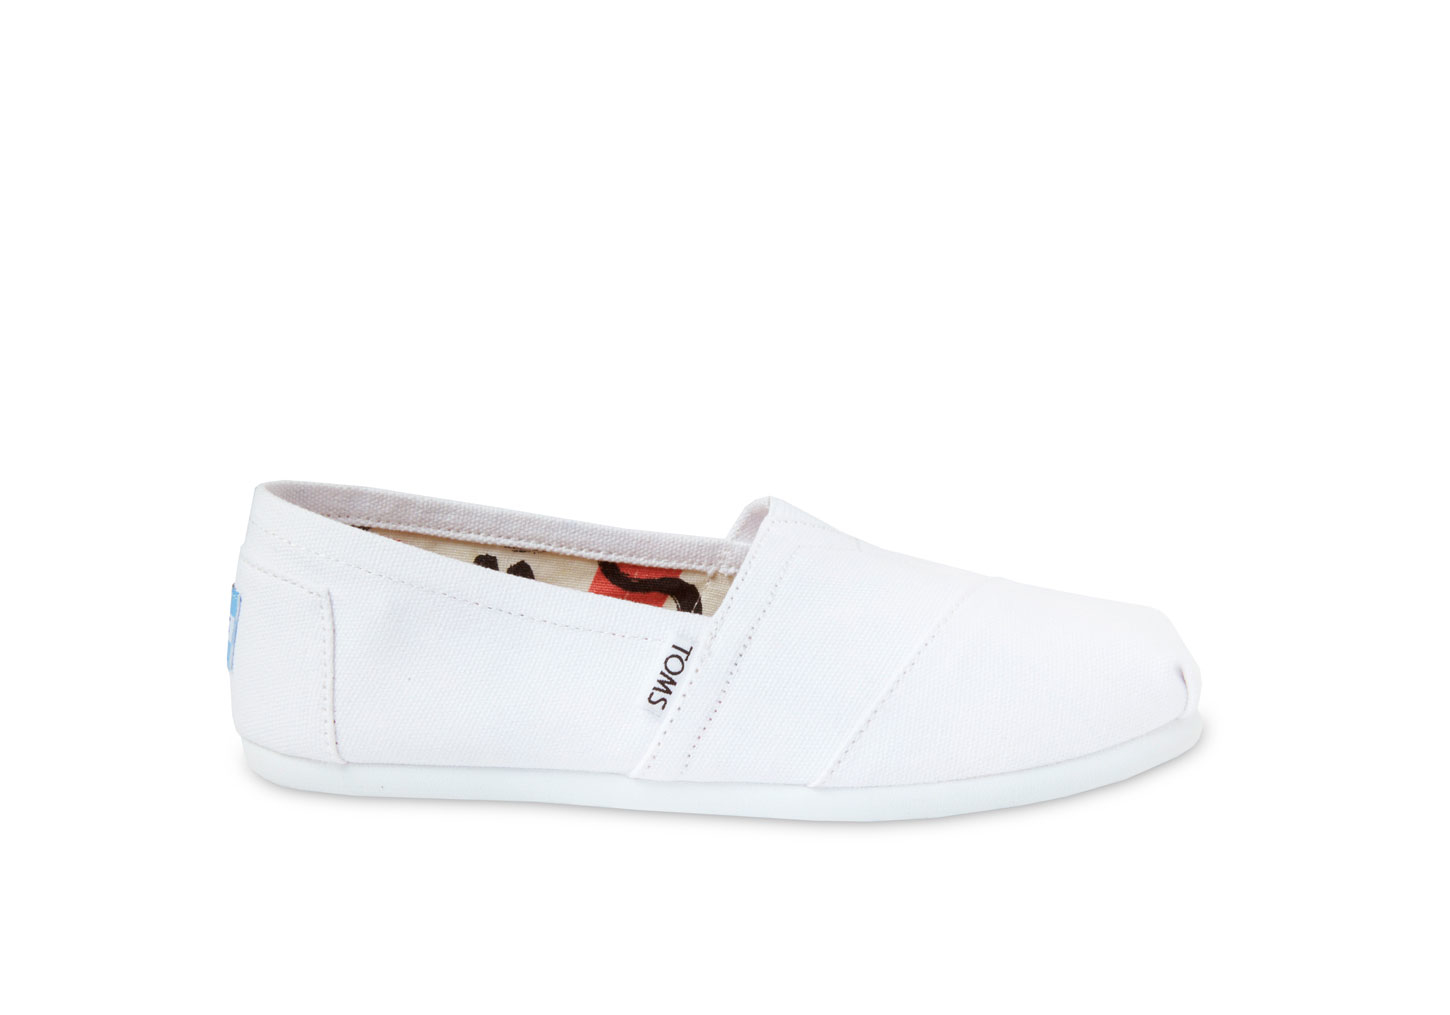 Toms Optic White Canvas Women's Classics in White | Lyst